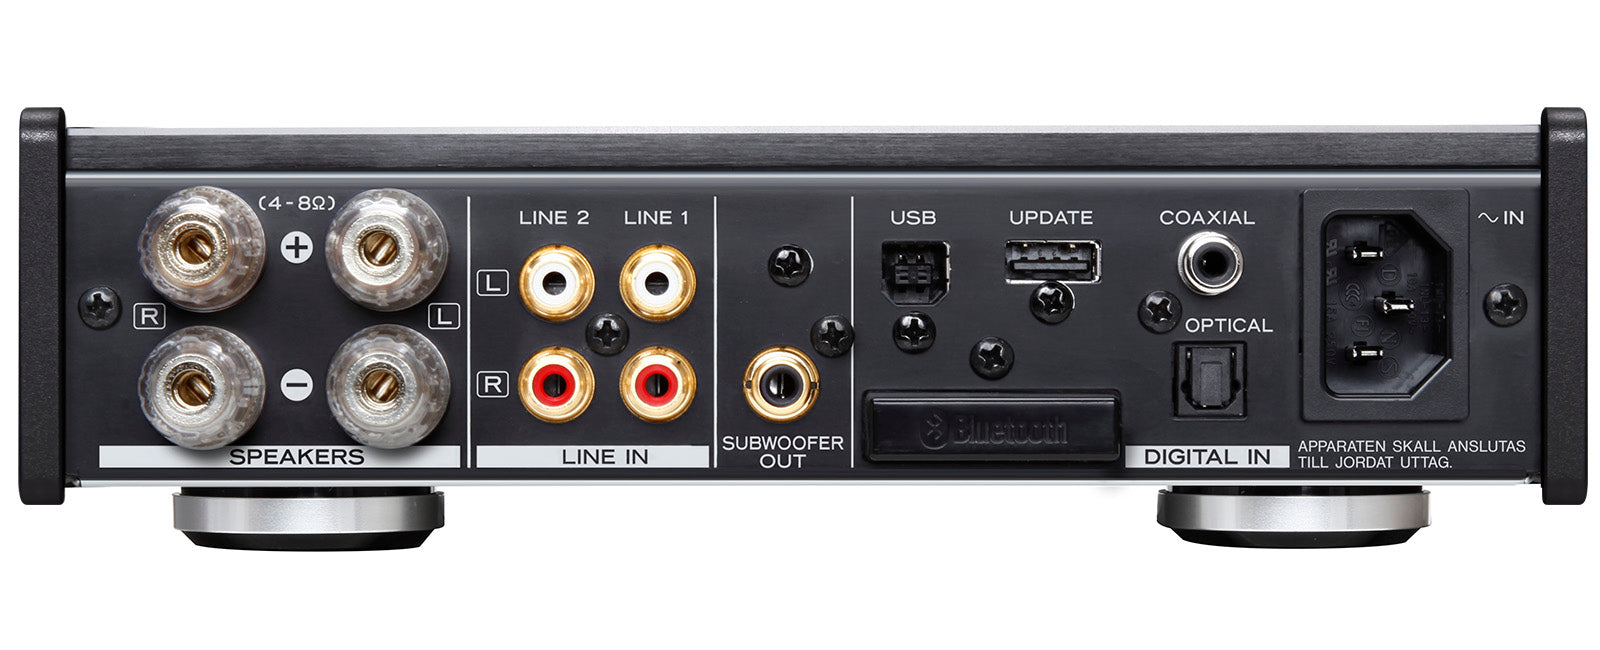 TEAC AI-301DA-X Integrated Amplifier with USB Streaming